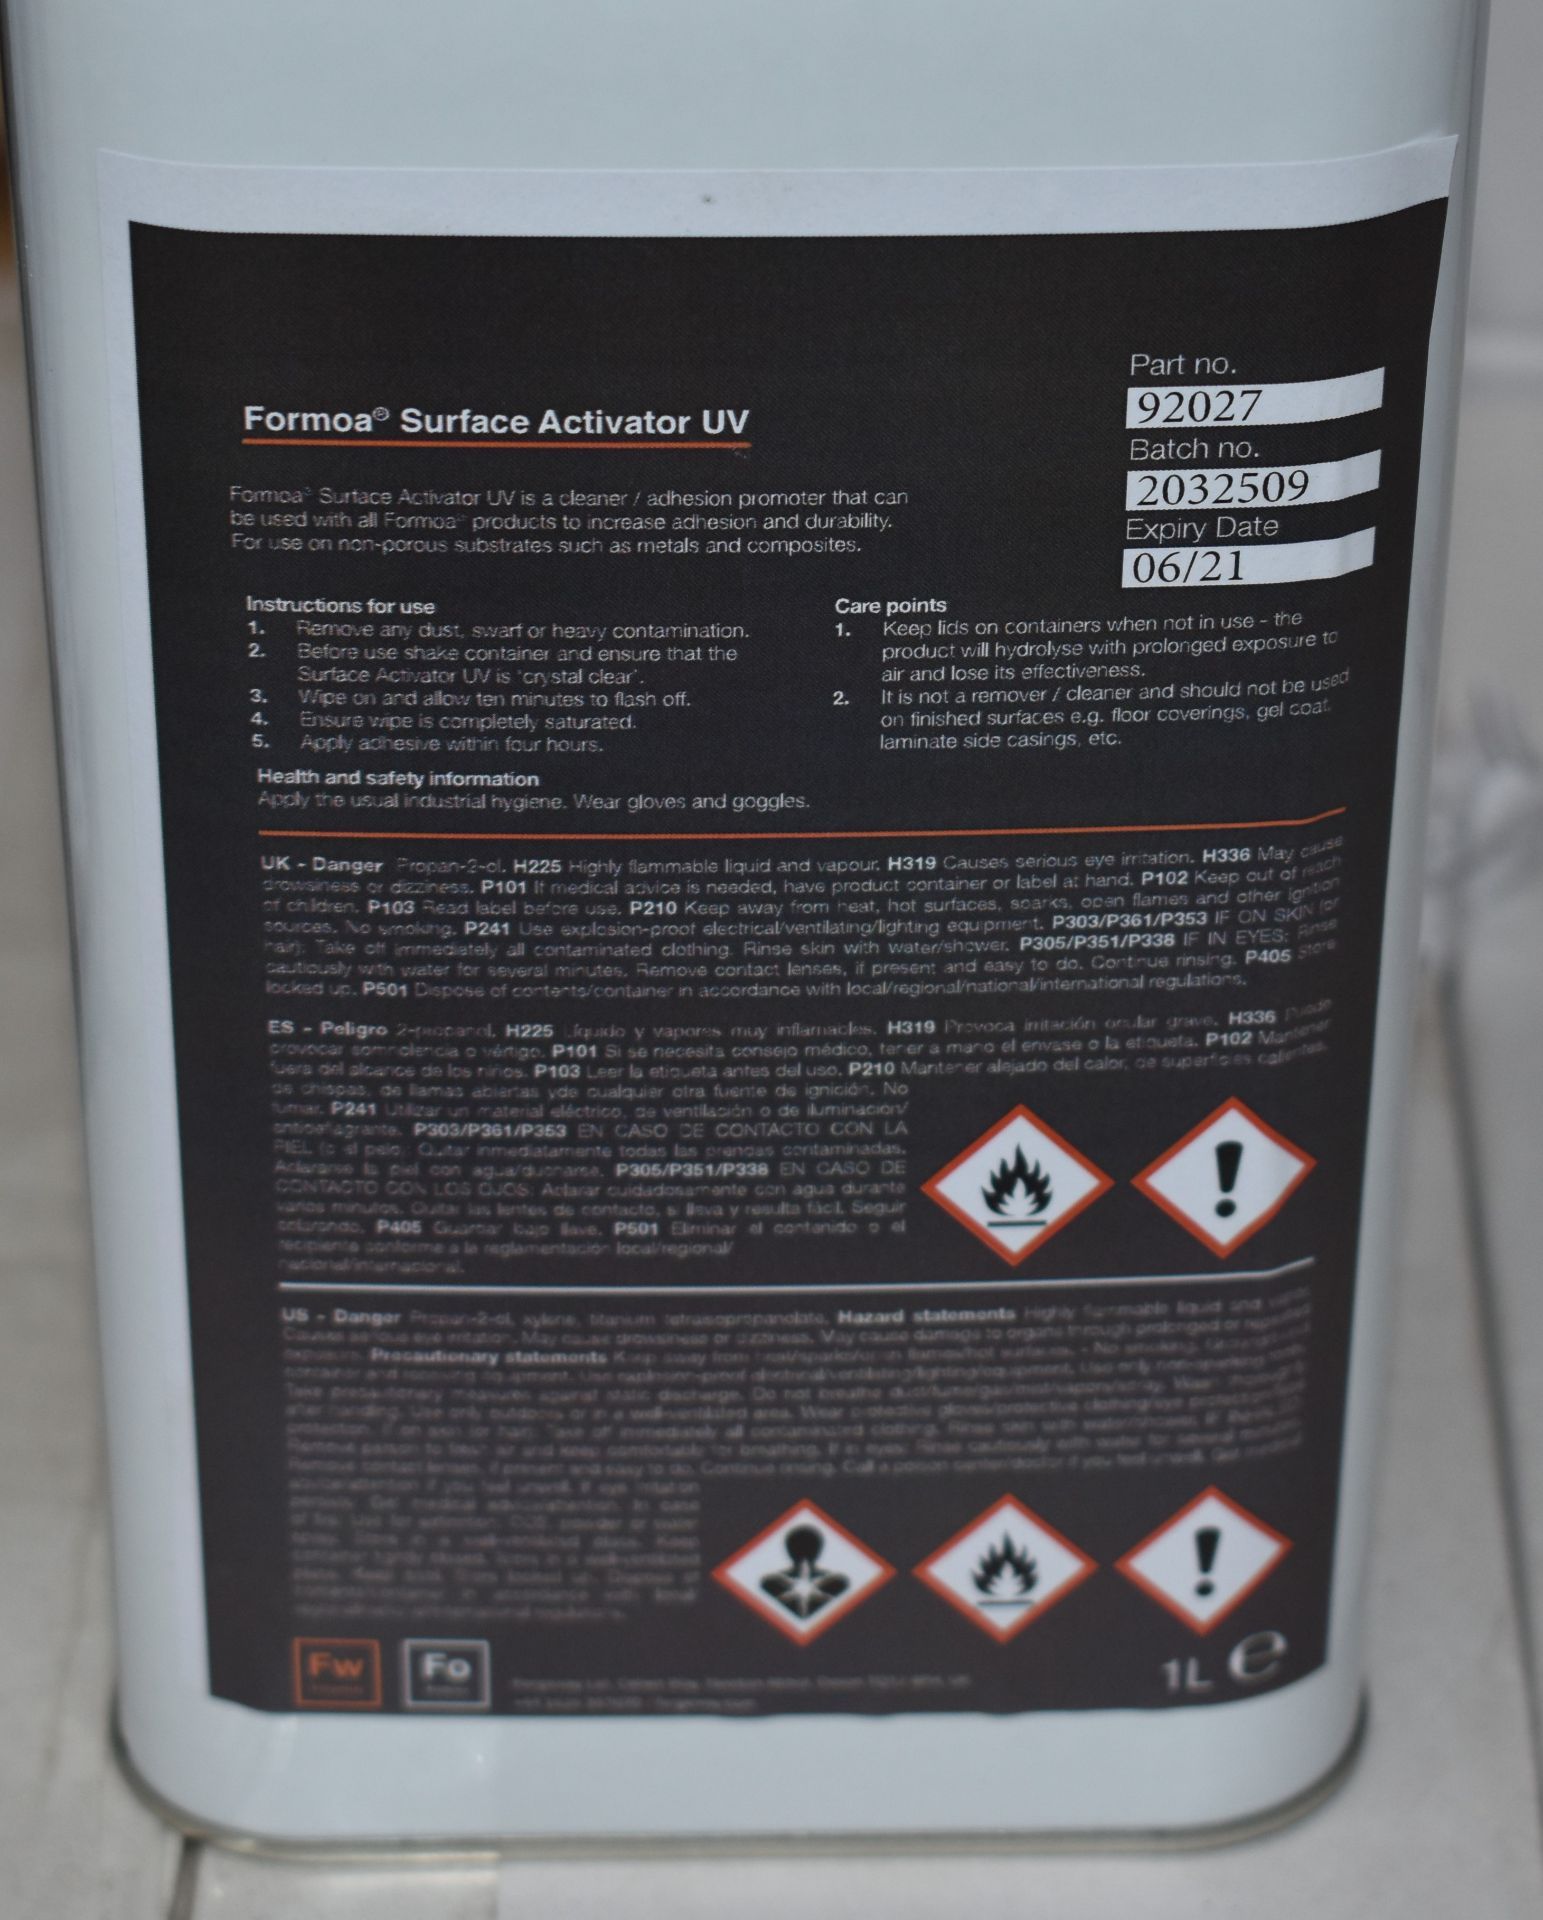 12 x Forgeway Formoa Surface Activator 1 Litre Containers - Adhesion Promotor, Cleaner, Degreaser - Image 3 of 6